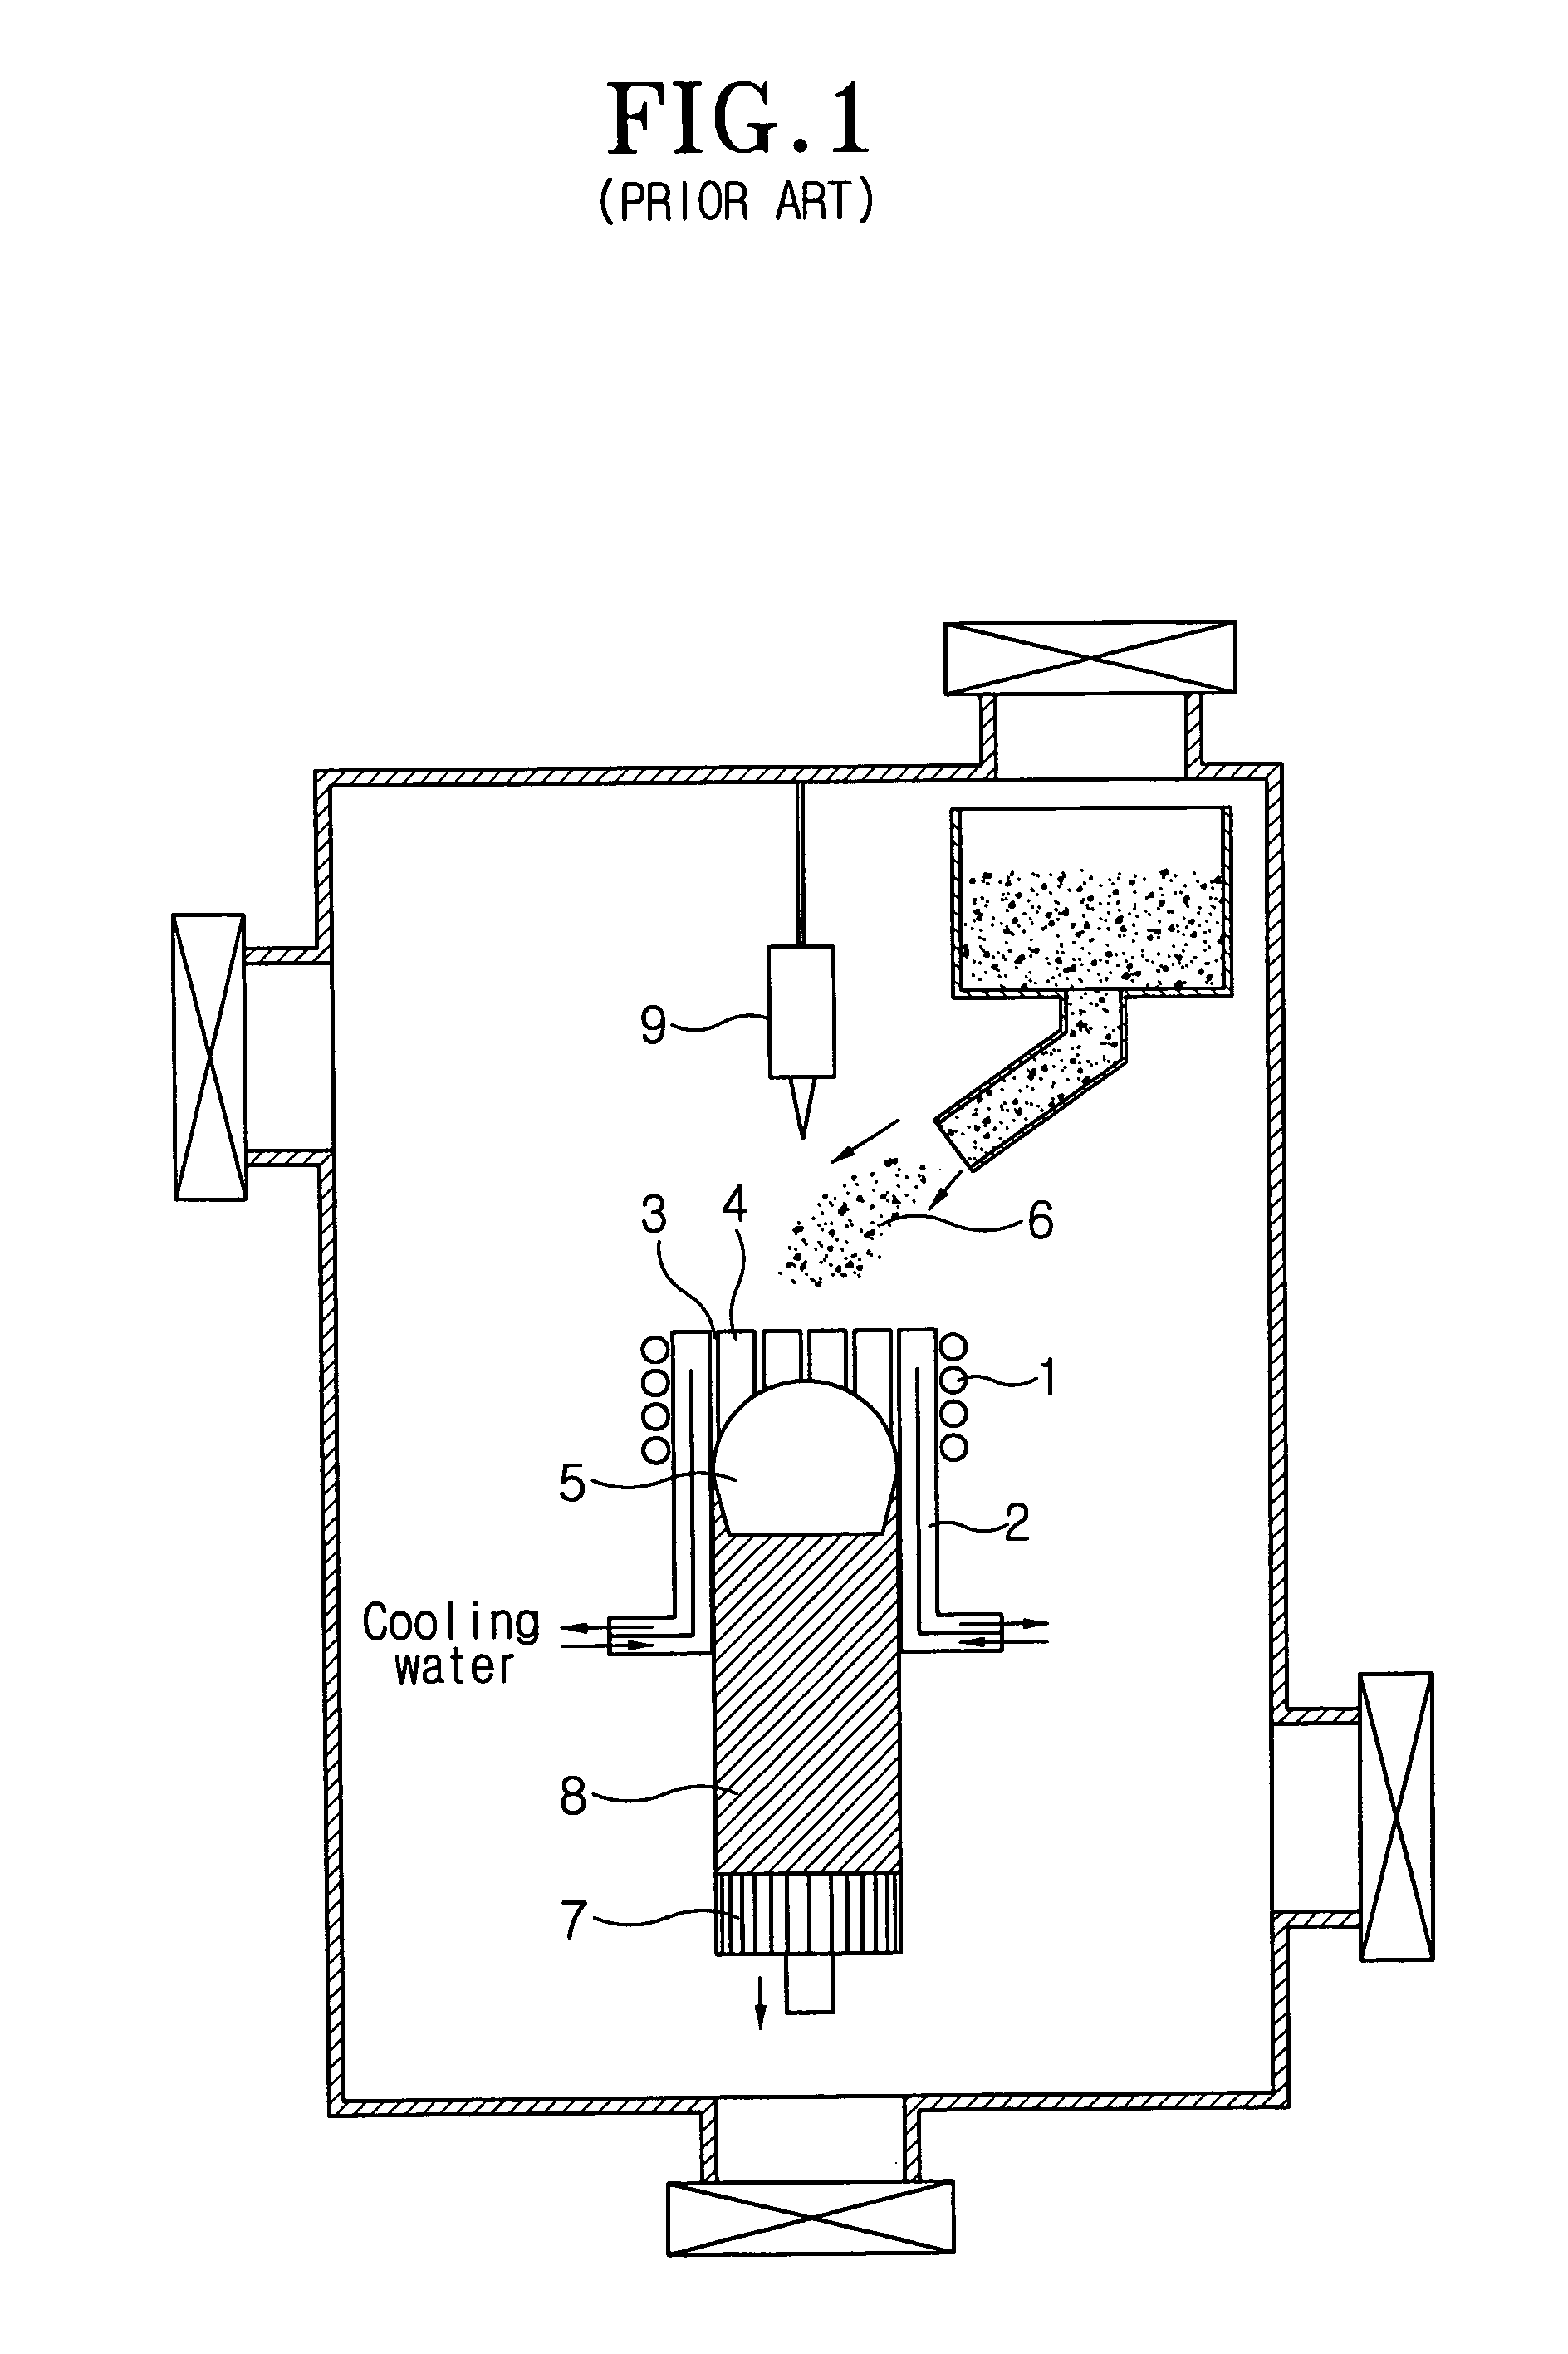 Electromagnetic continuous casting apparatus for materials possessing high melting temperature and low electric conductance